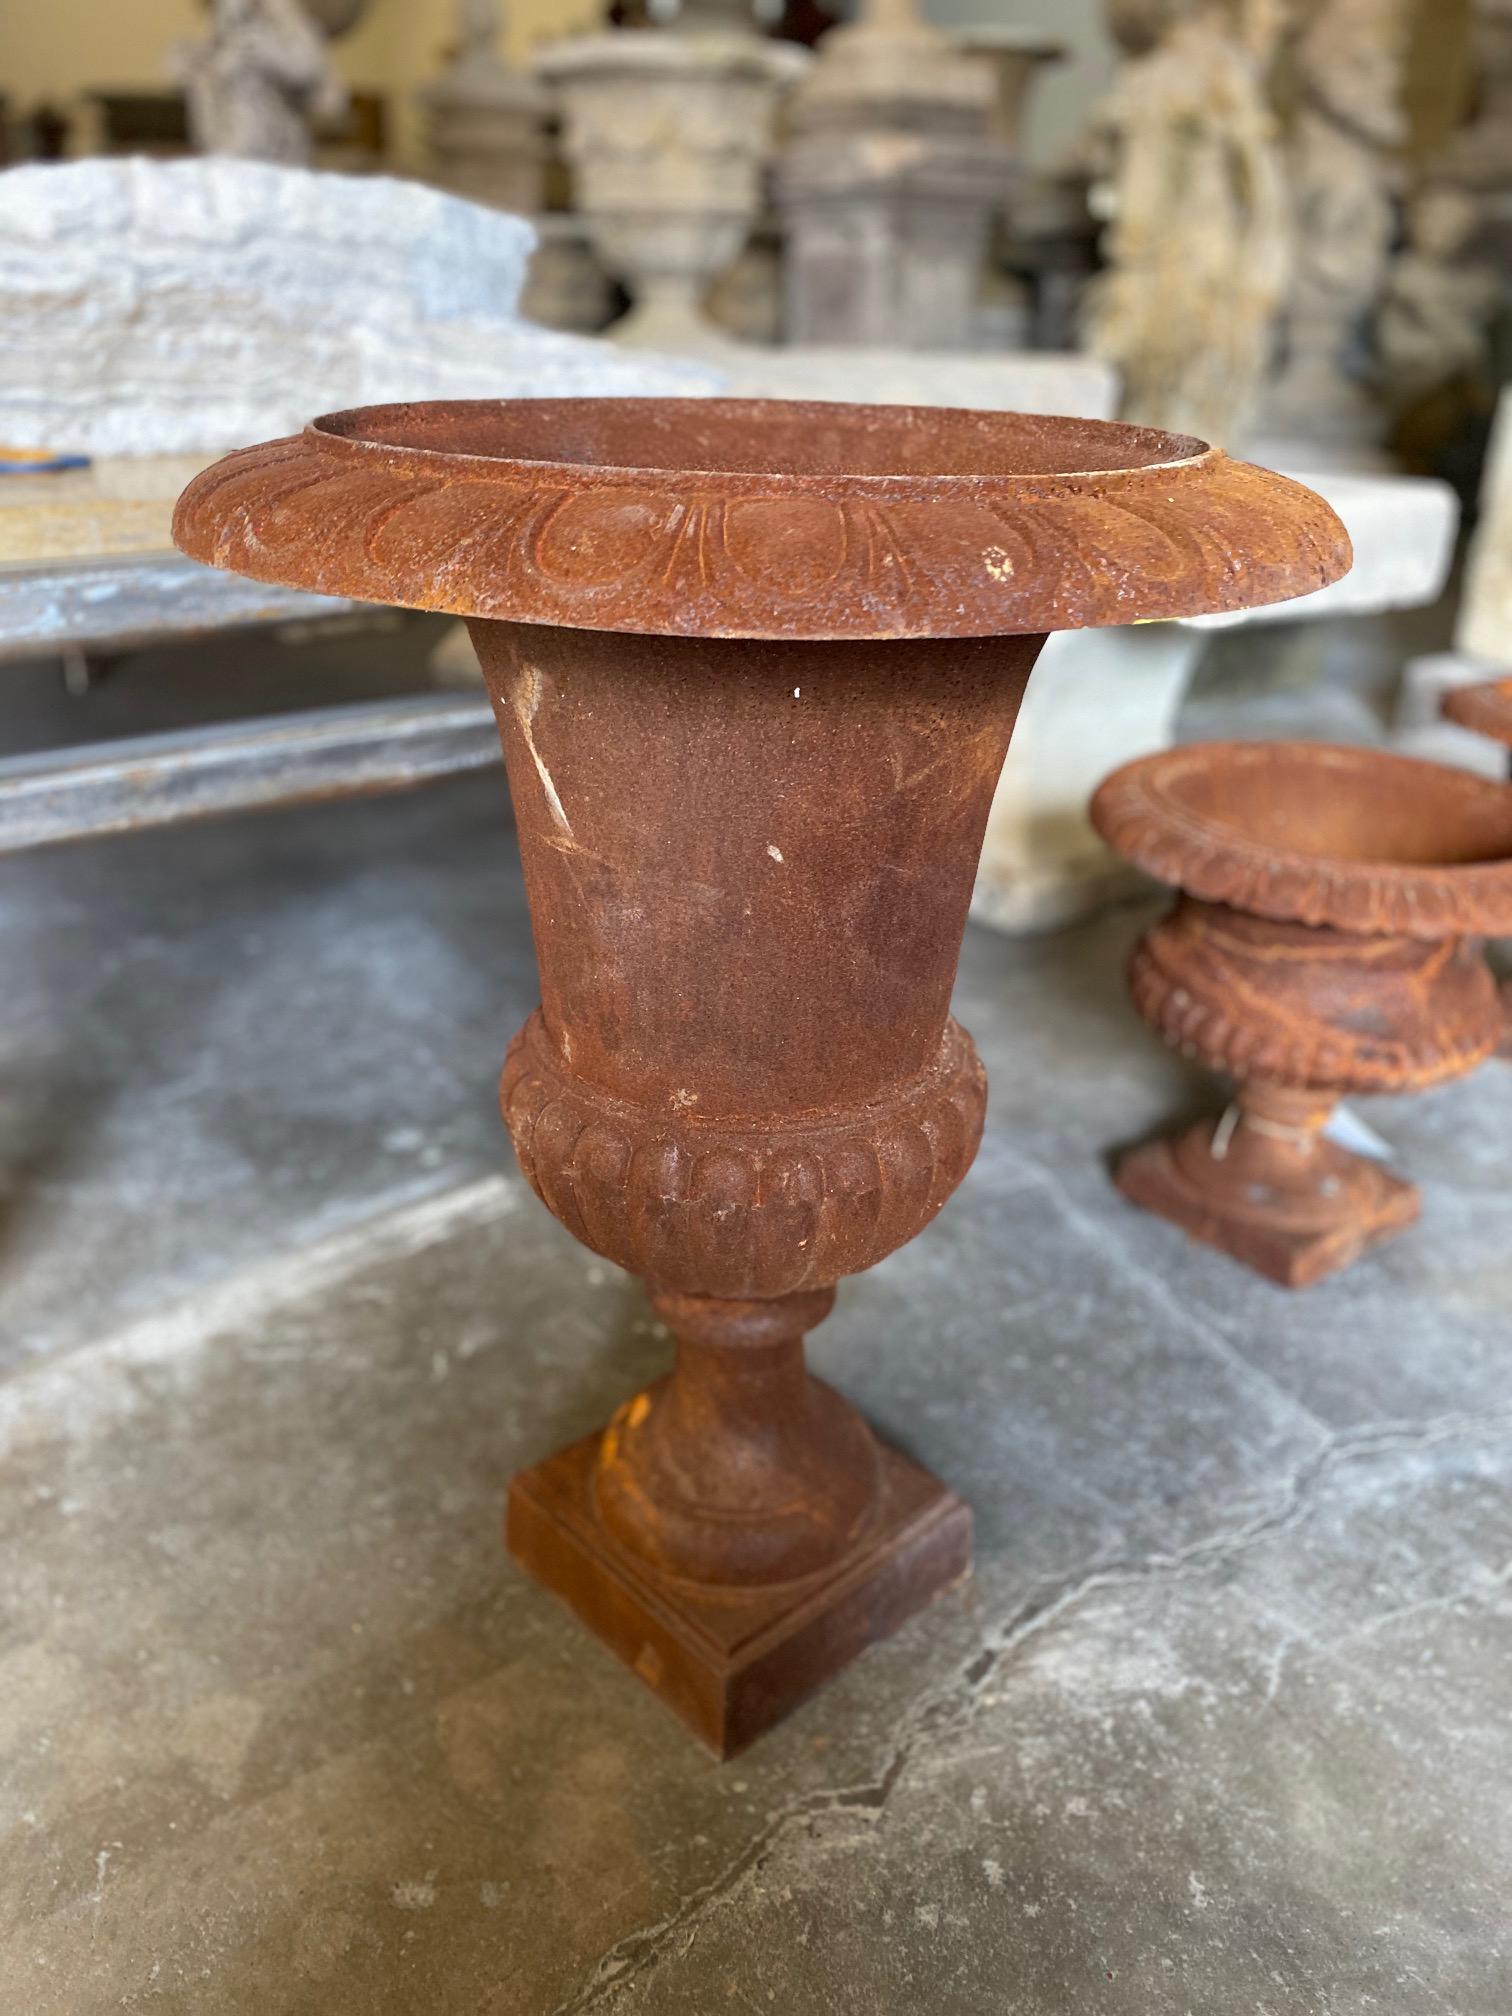 This contemporary urn features an iron / rust exterior to add charm to a garden or landscape.

Measurements: 19